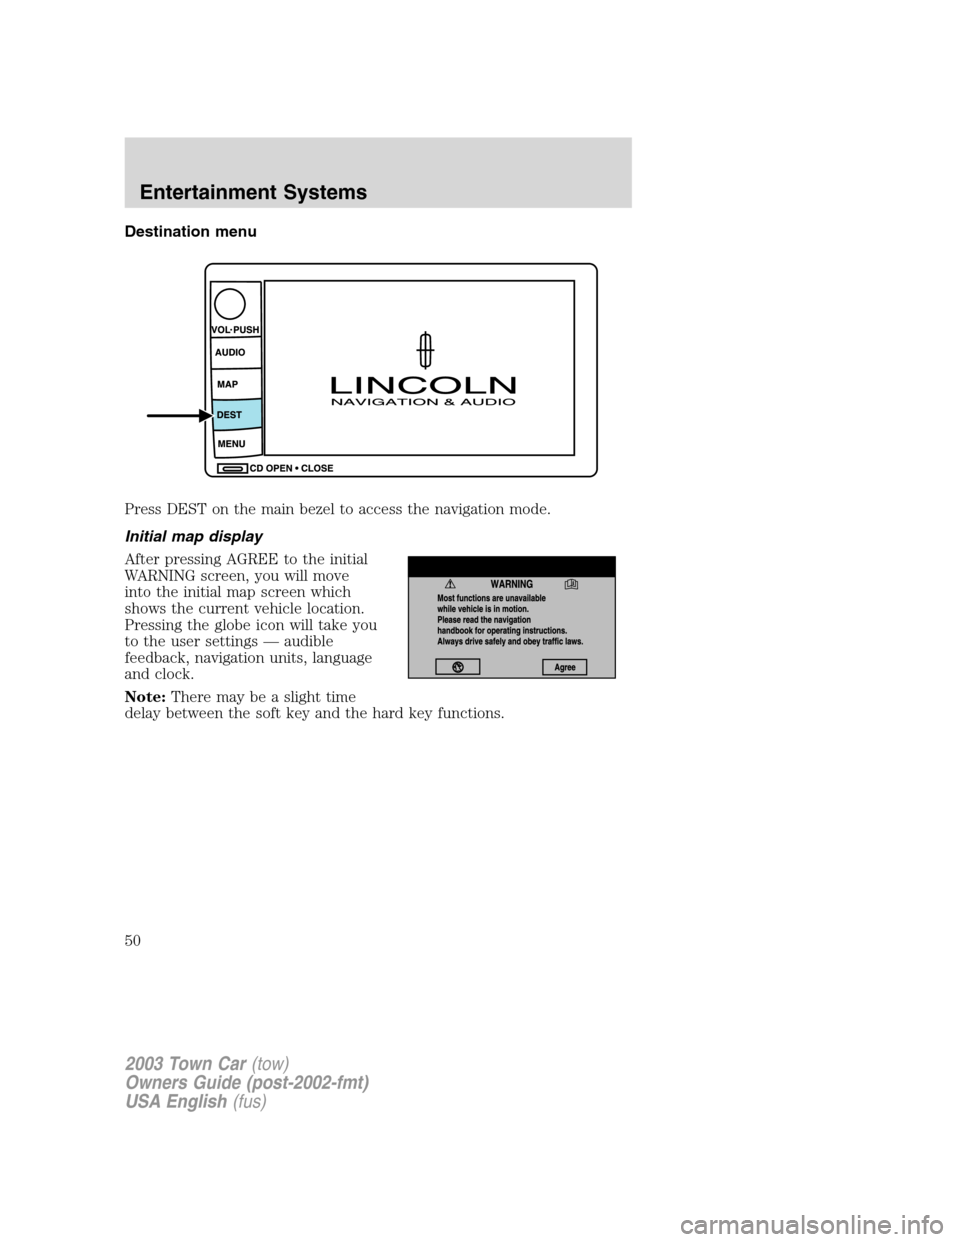 LINCOLN TOWN CAR 2003  Owners Manual Destination menu
Press DEST on the main bezel to access the navigation mode.
Initial map display
After pressing AGREE to the initial
WARNING screen, you will move
into the initial map screen which
sho